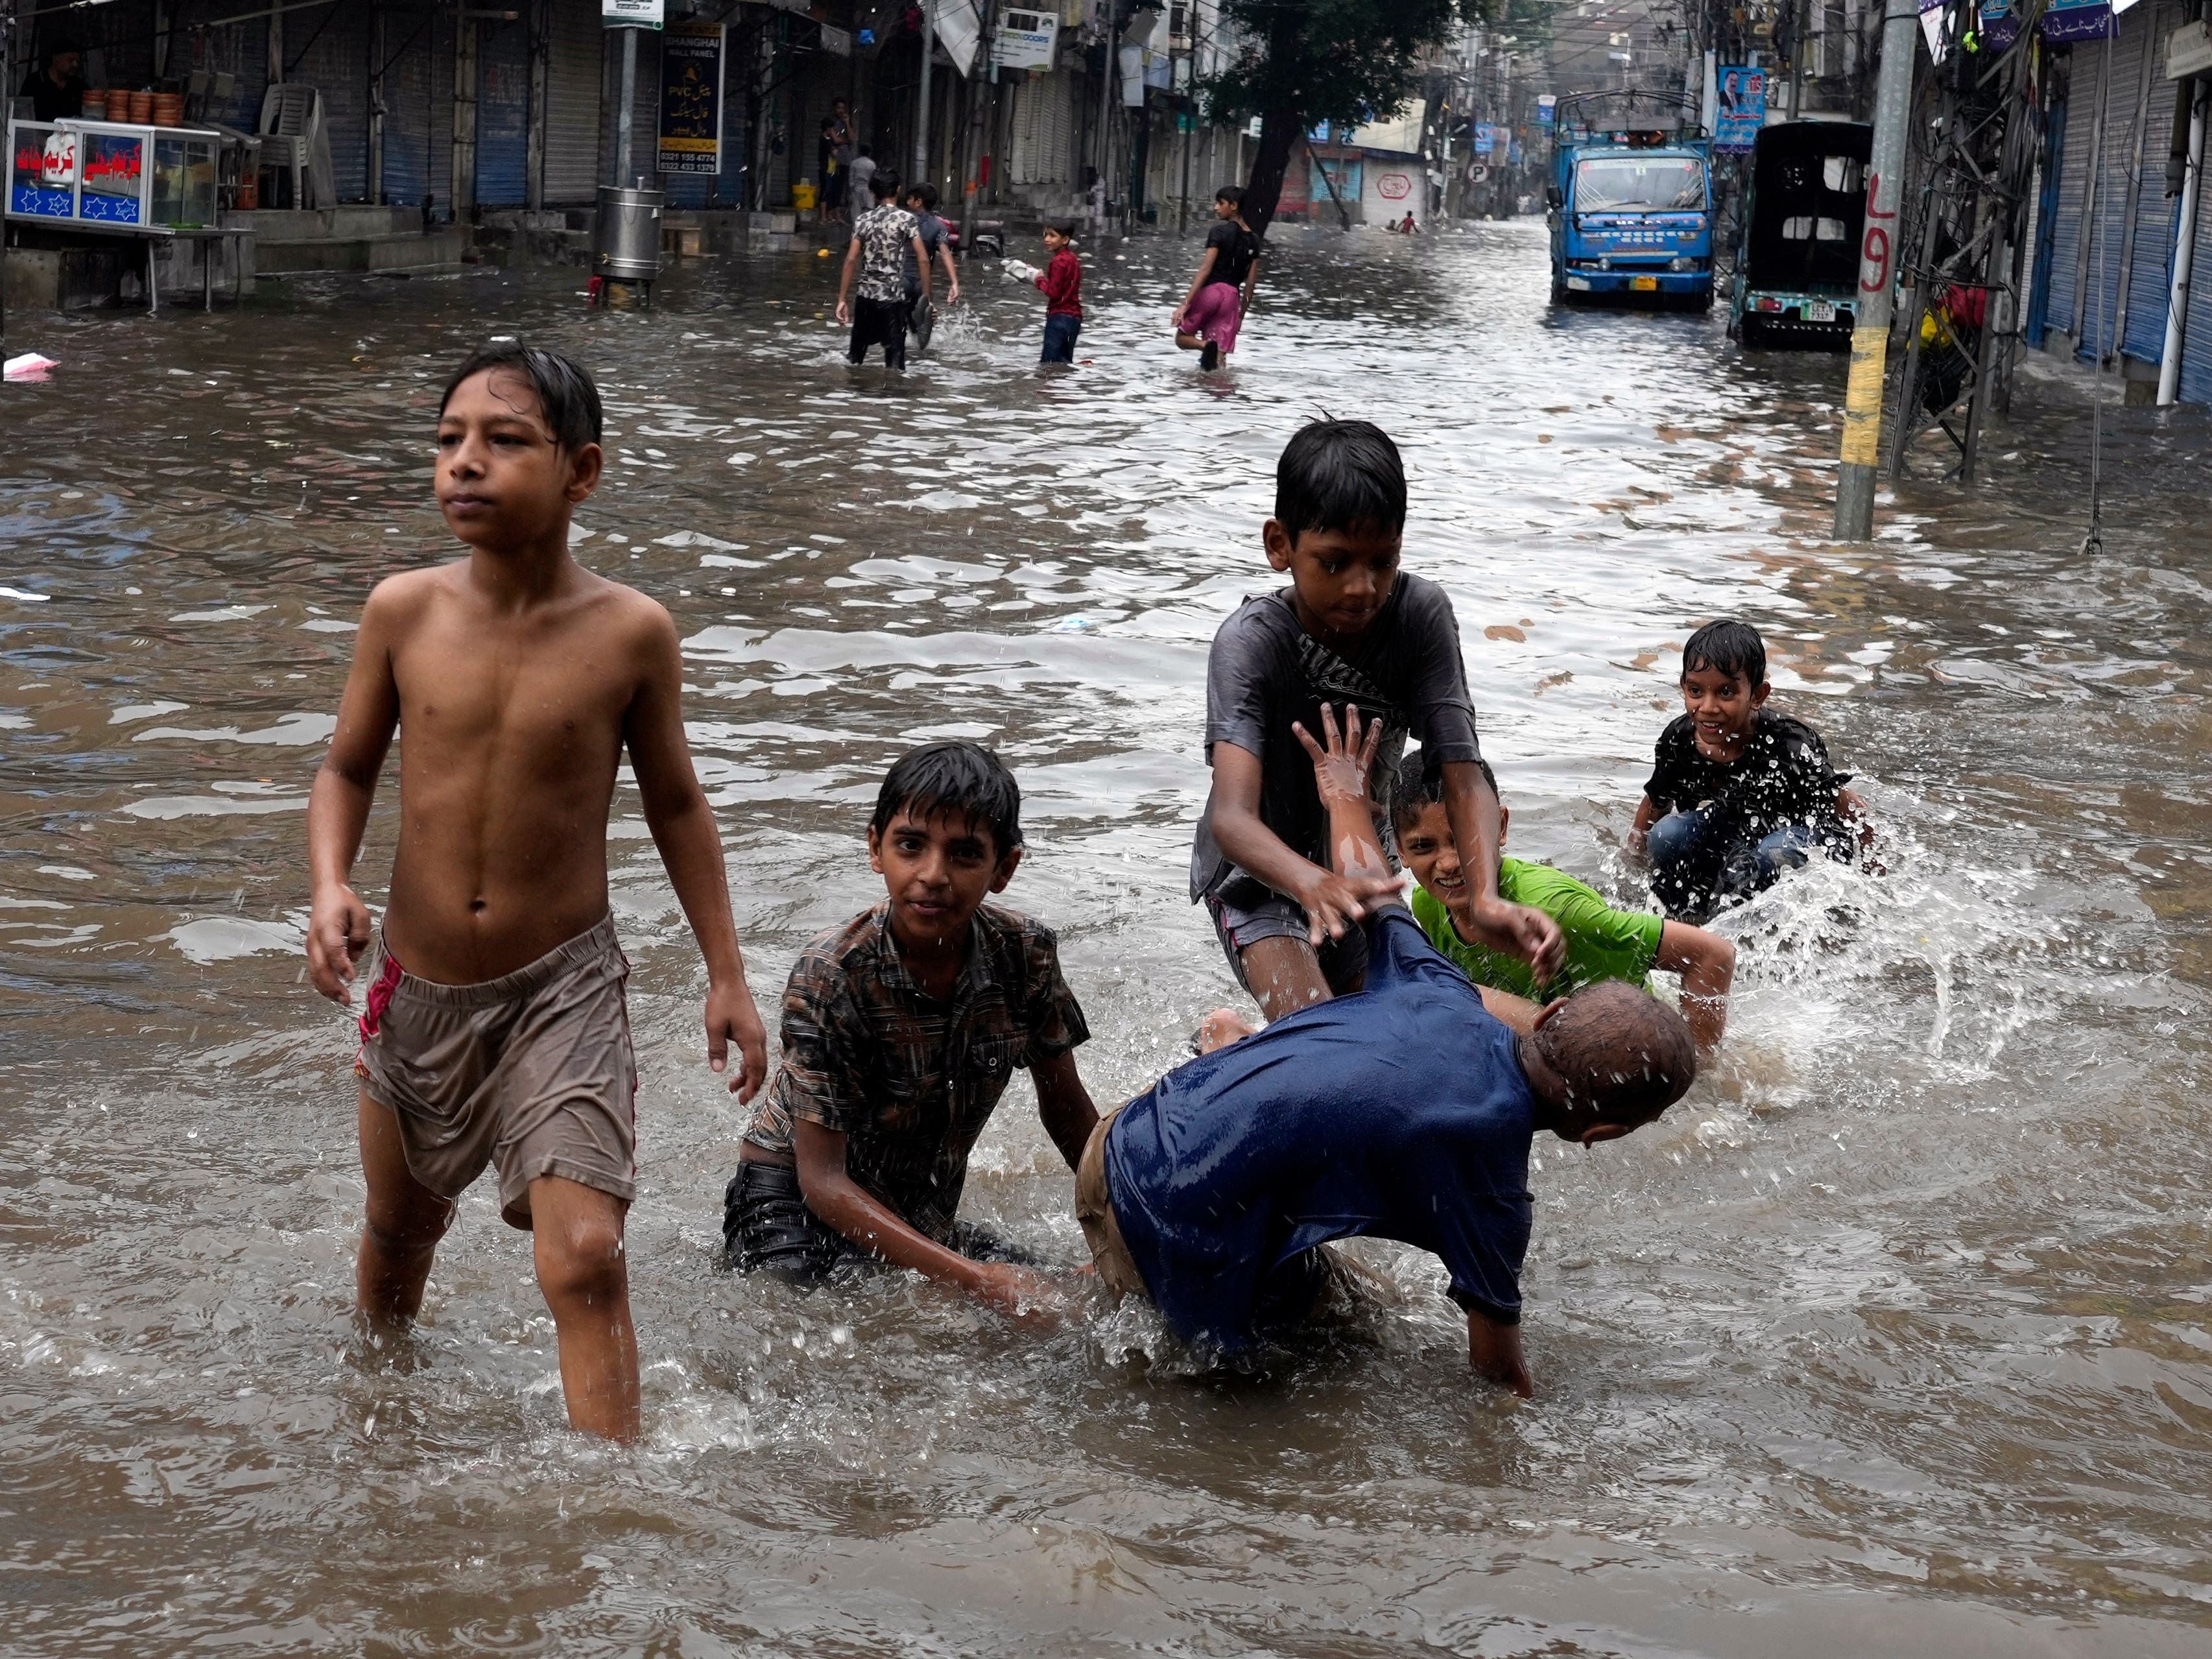 Flooding hits Pakistan’s cultural capital Lahore after record rainfall